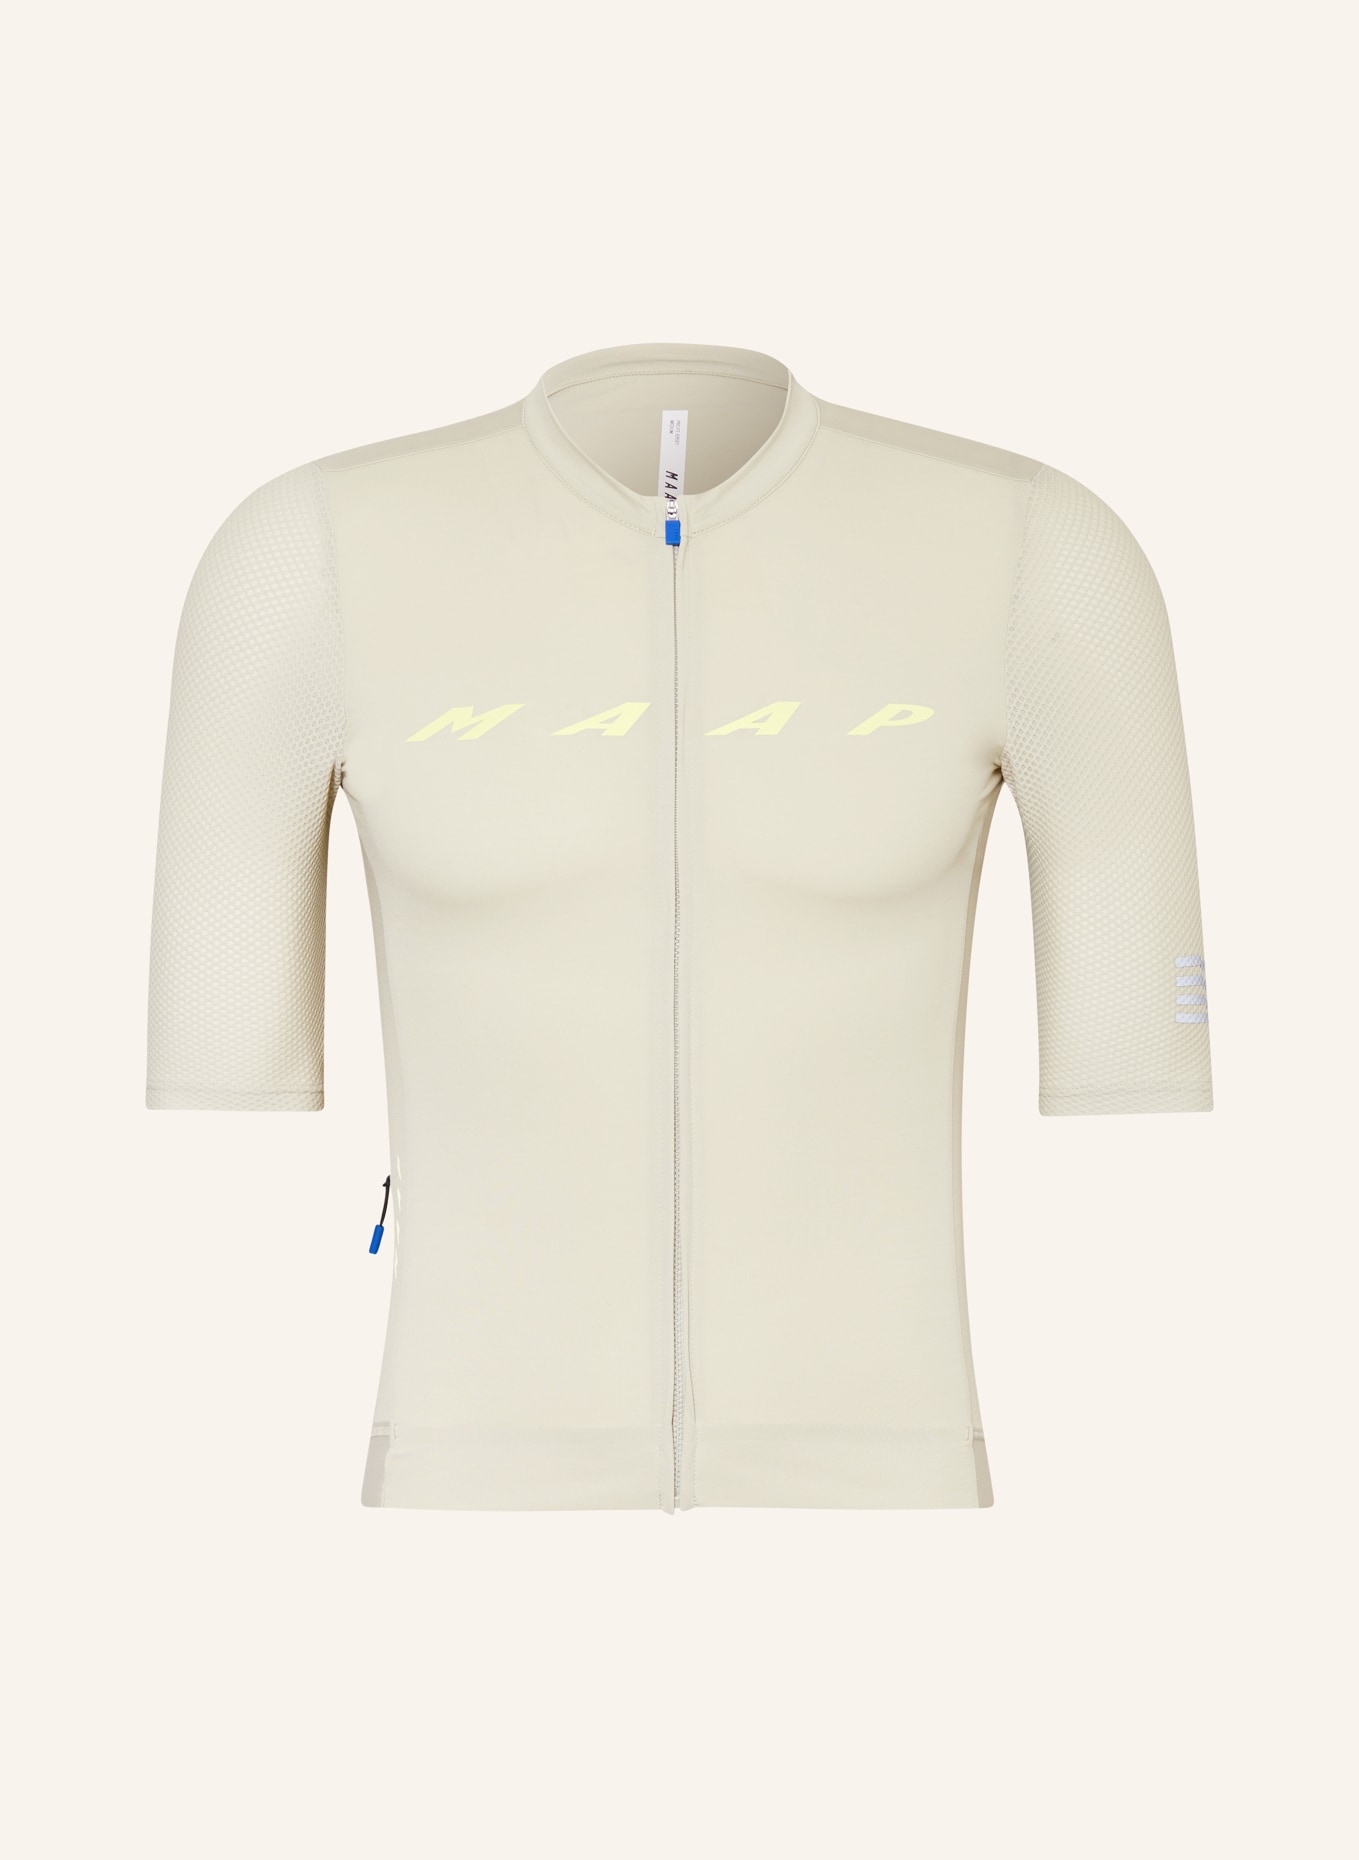 MAAP Cycling jersey EVADE PRO BASE 2.0, Color: LIGHT YELLOW (Image 1)